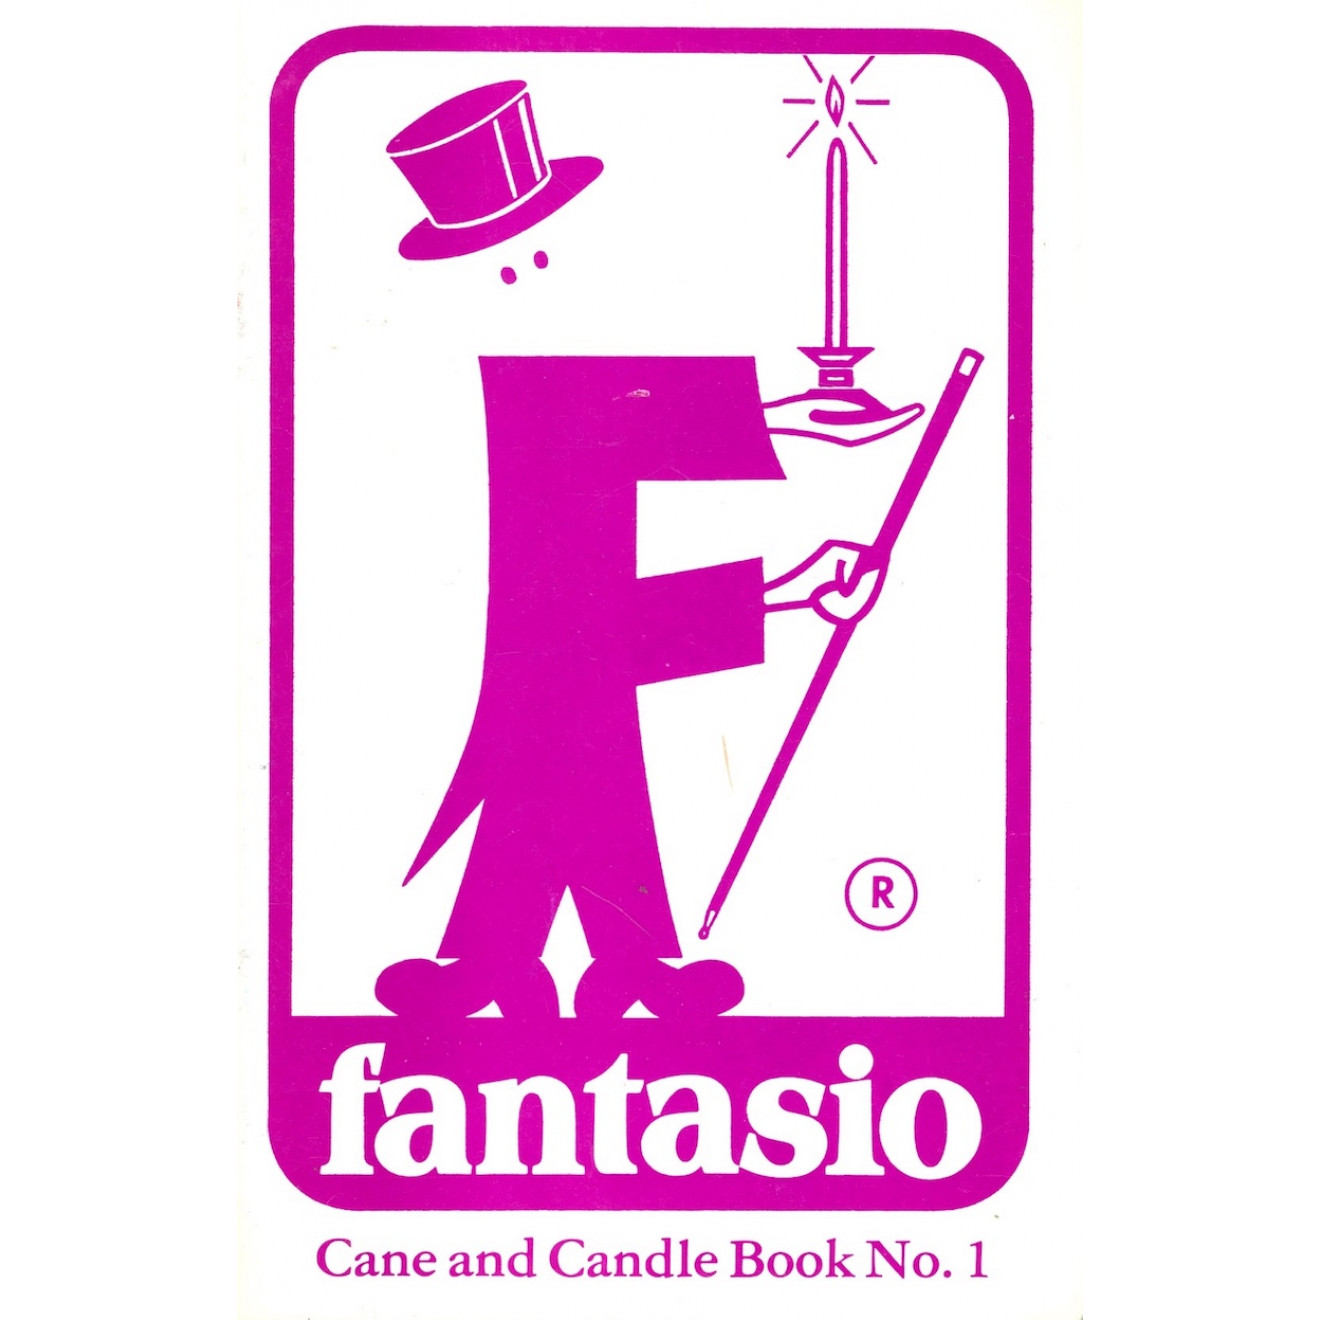 Fantasio's Cane and Candle Book No. 1